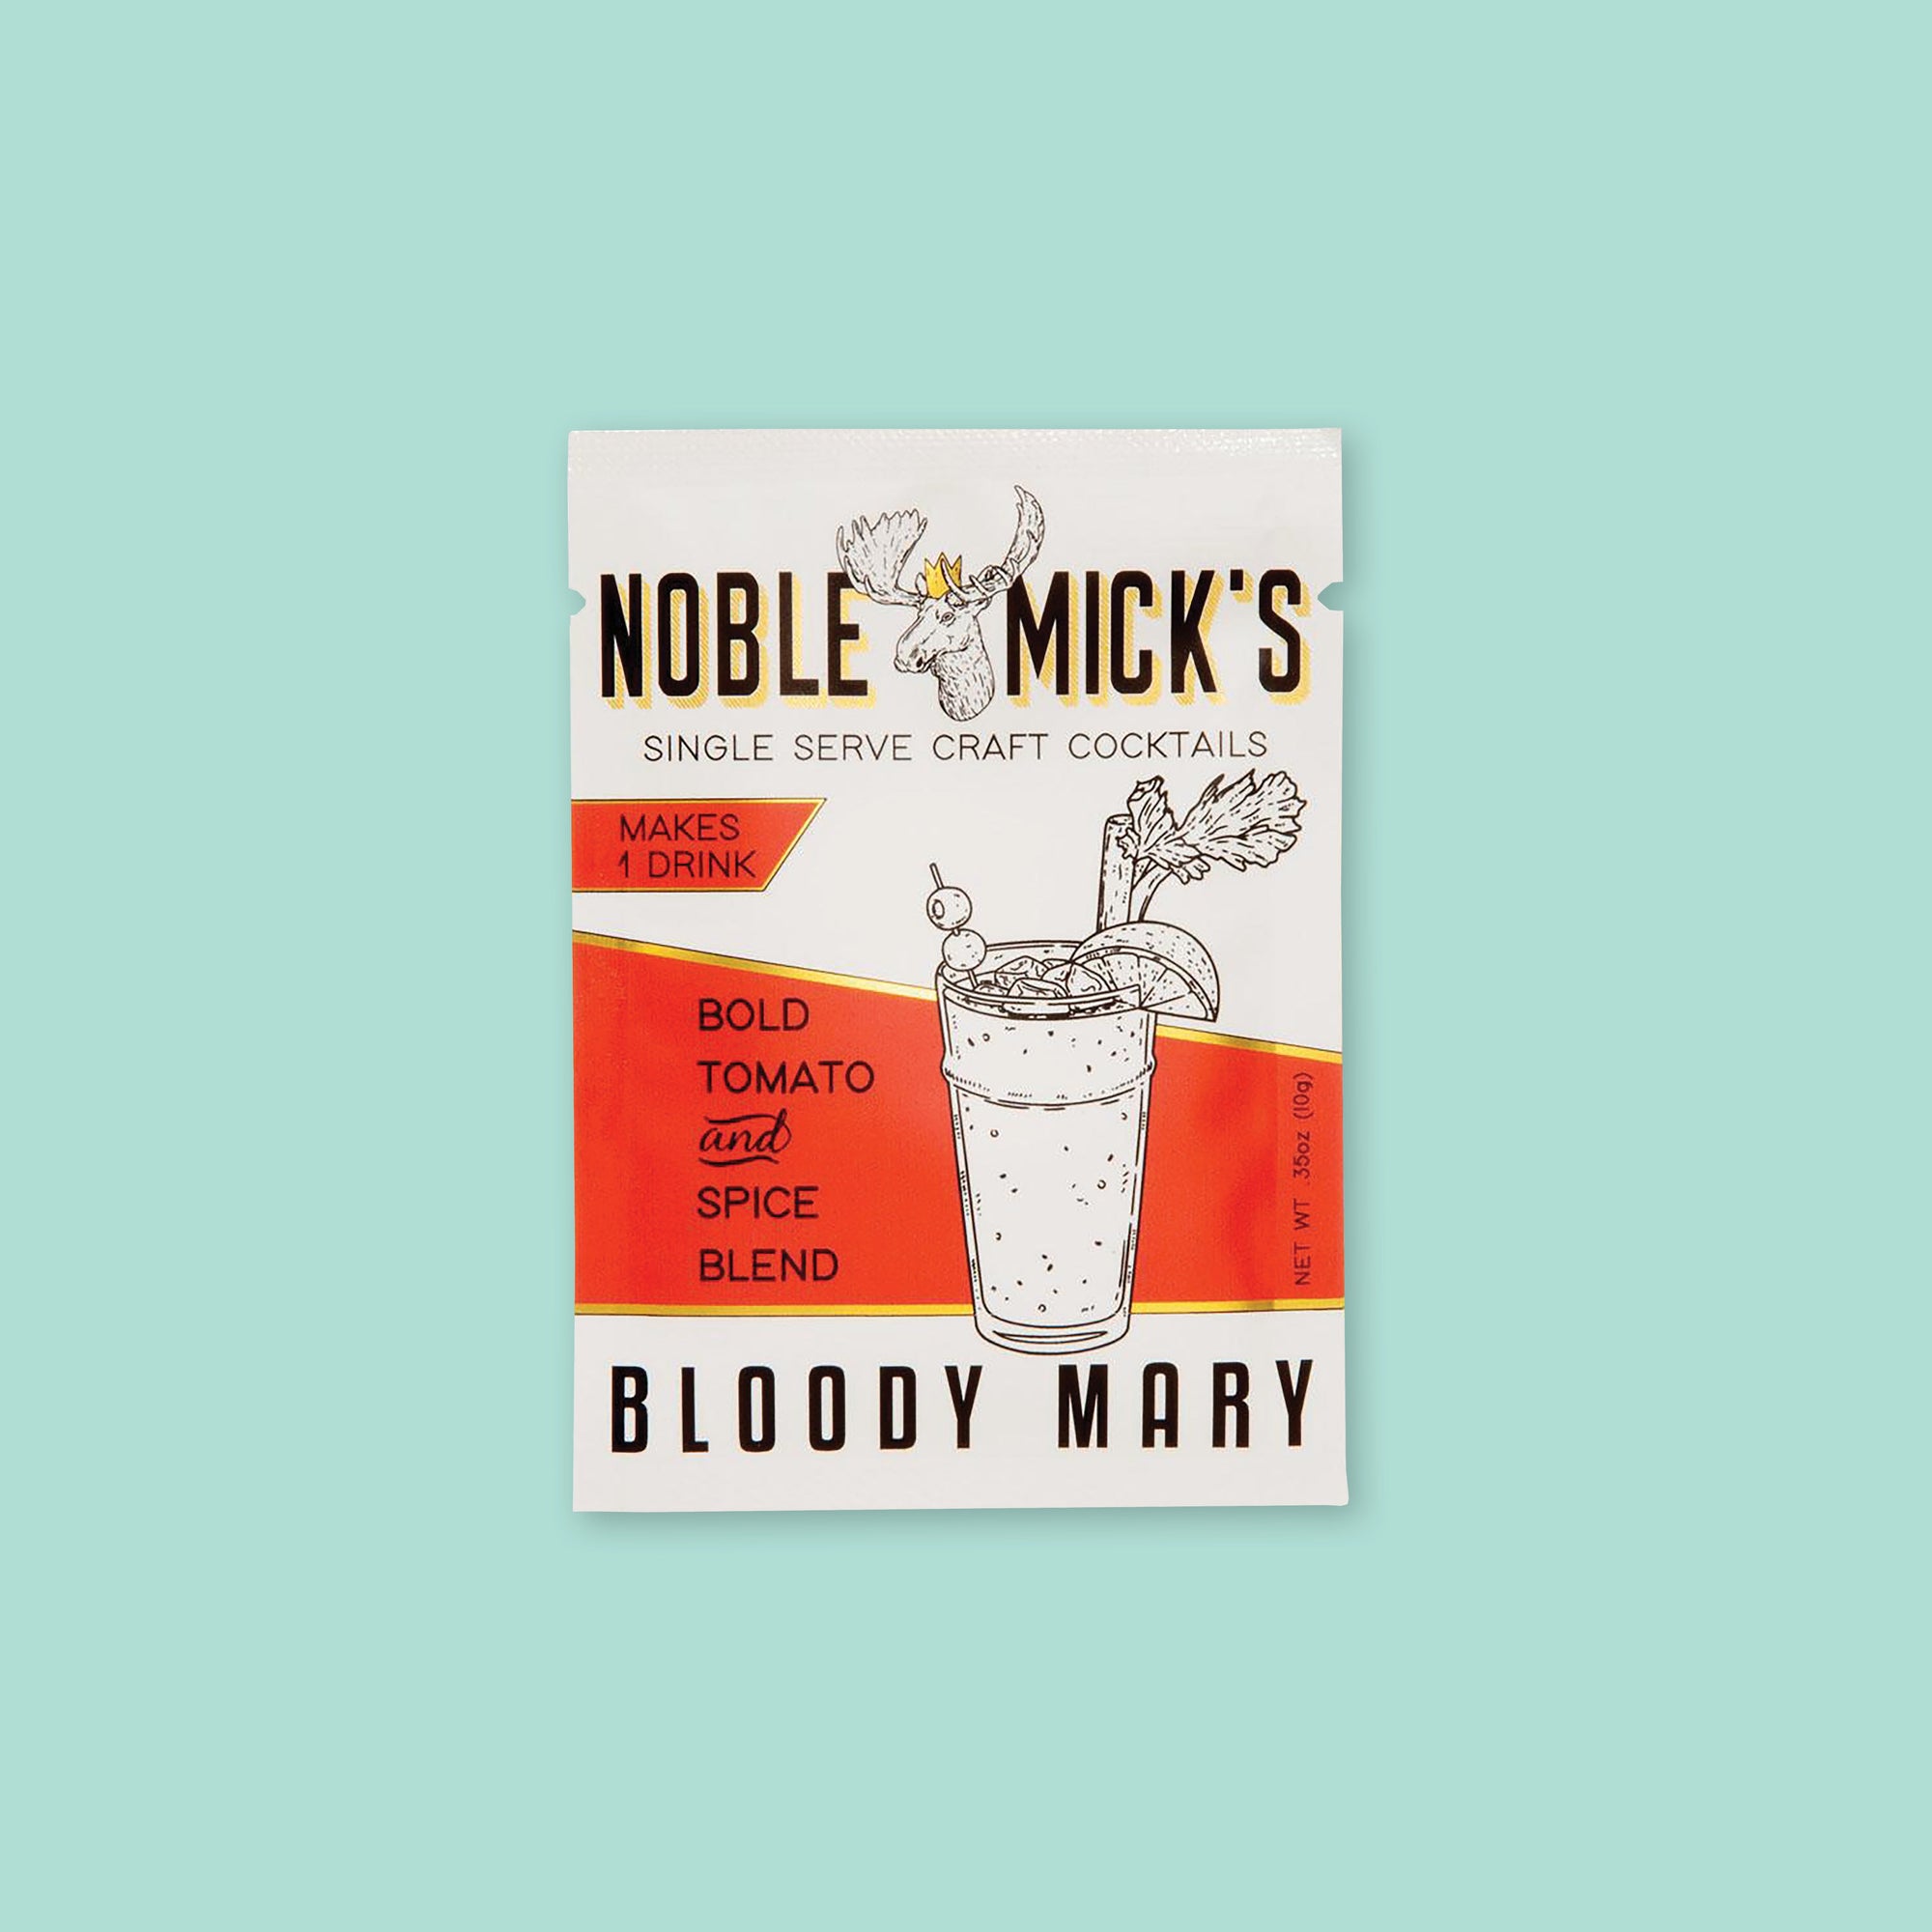 On a mint green background sits a package. This white package has red and gold labels and black, all caps block lettering. There is an illustration of a moose head and a bloody mary glass. It says "NOBLE MICK'S SINGLE SERVE CRAFT COCKTAILS," "MAKES 1 DRINK," "BOLD TOMATO and SPICE BLEND," "BLOODY MARY." Net wt .35oz (10g)